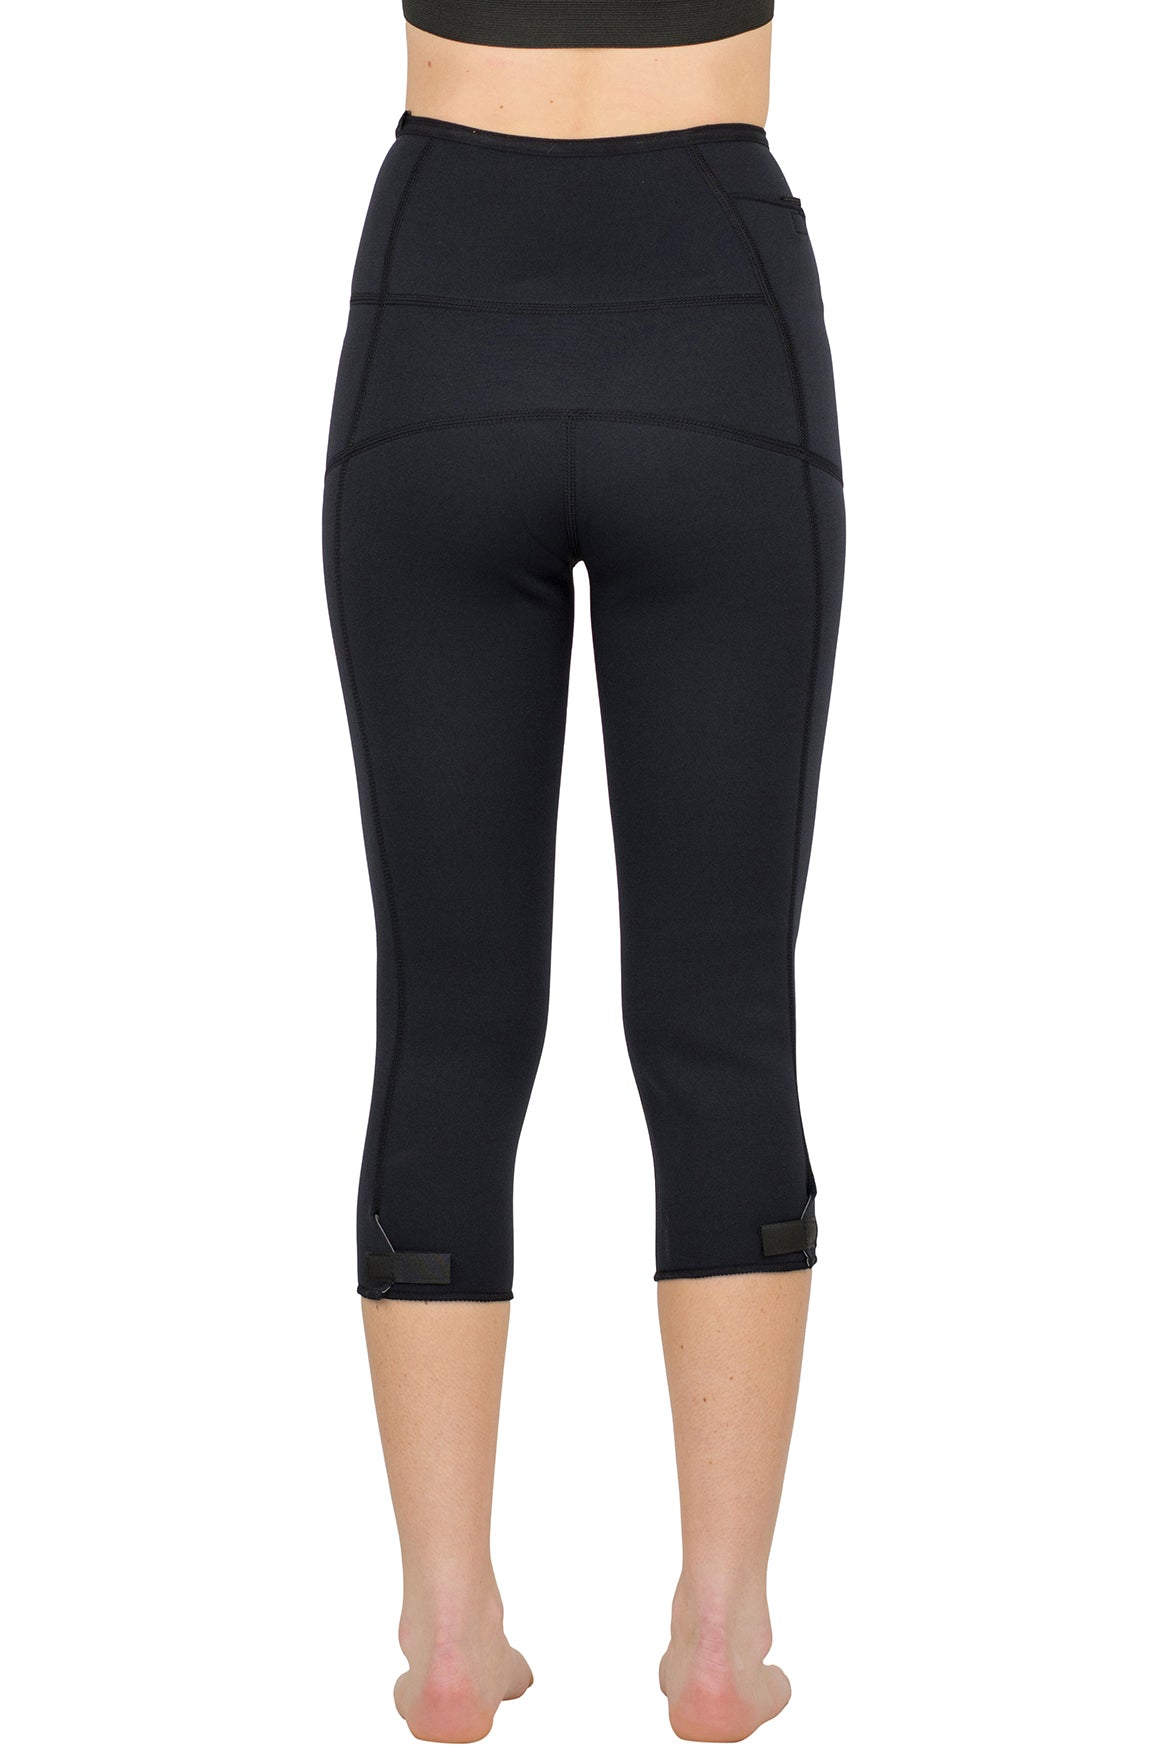 Women's Shorts, Capris, Leggings - Mineral Infused Collection - Delfin Spa  – tagged Capris – Delfin Brands